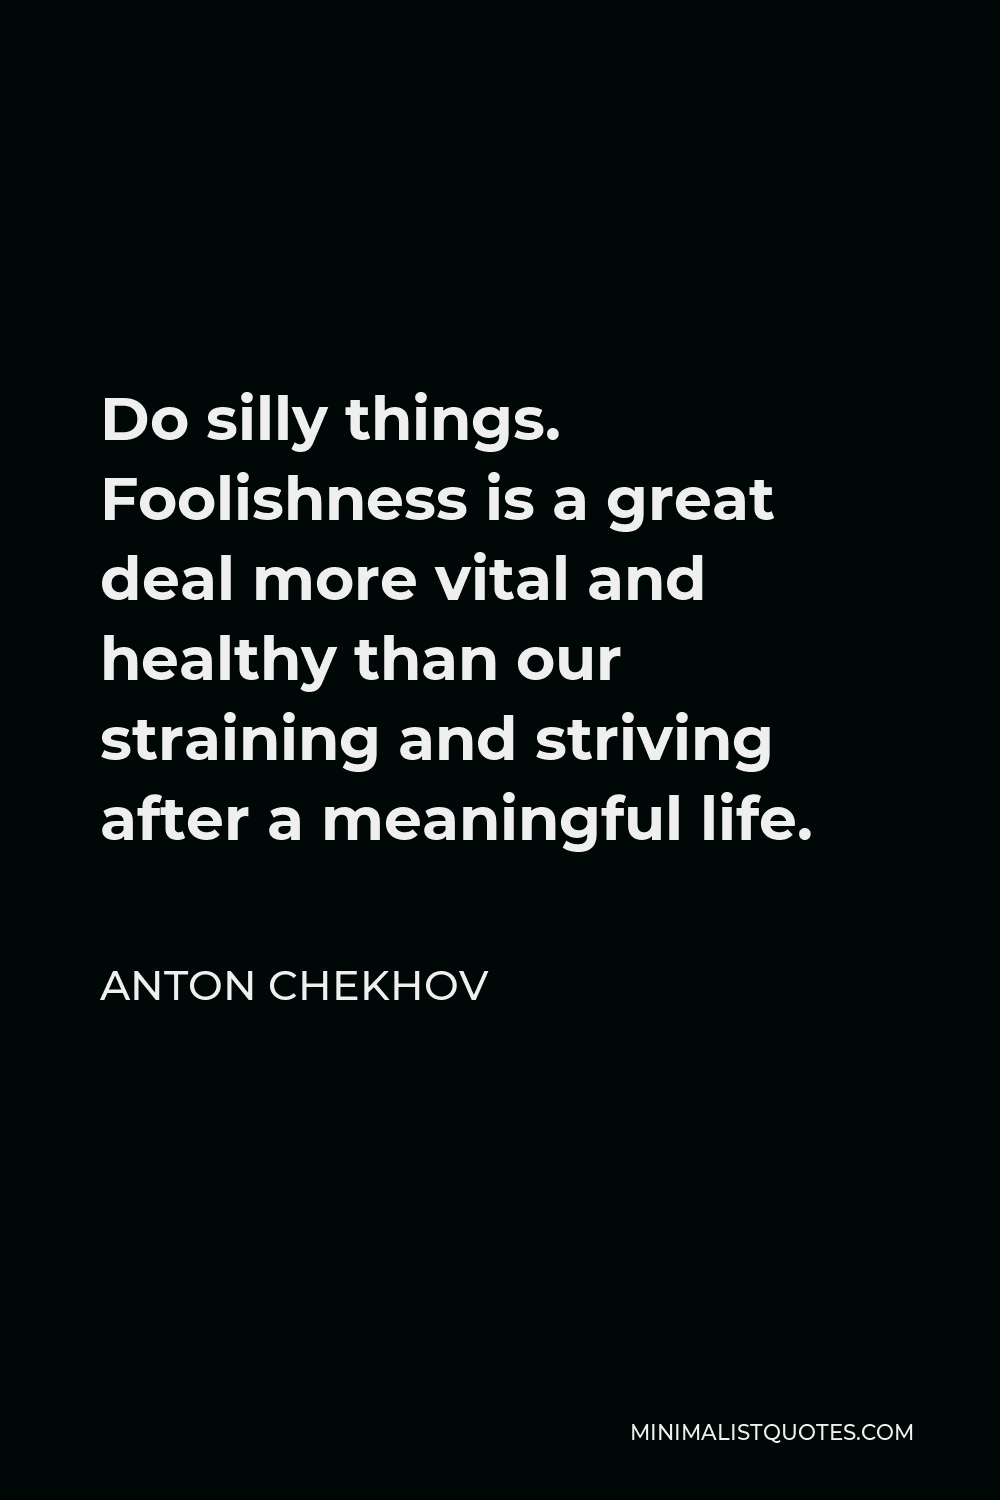 Anton Chekhov Quote - Do silly things. Foolishness is a great deal more vital and healthy than our straining and striving after a meaningful life.